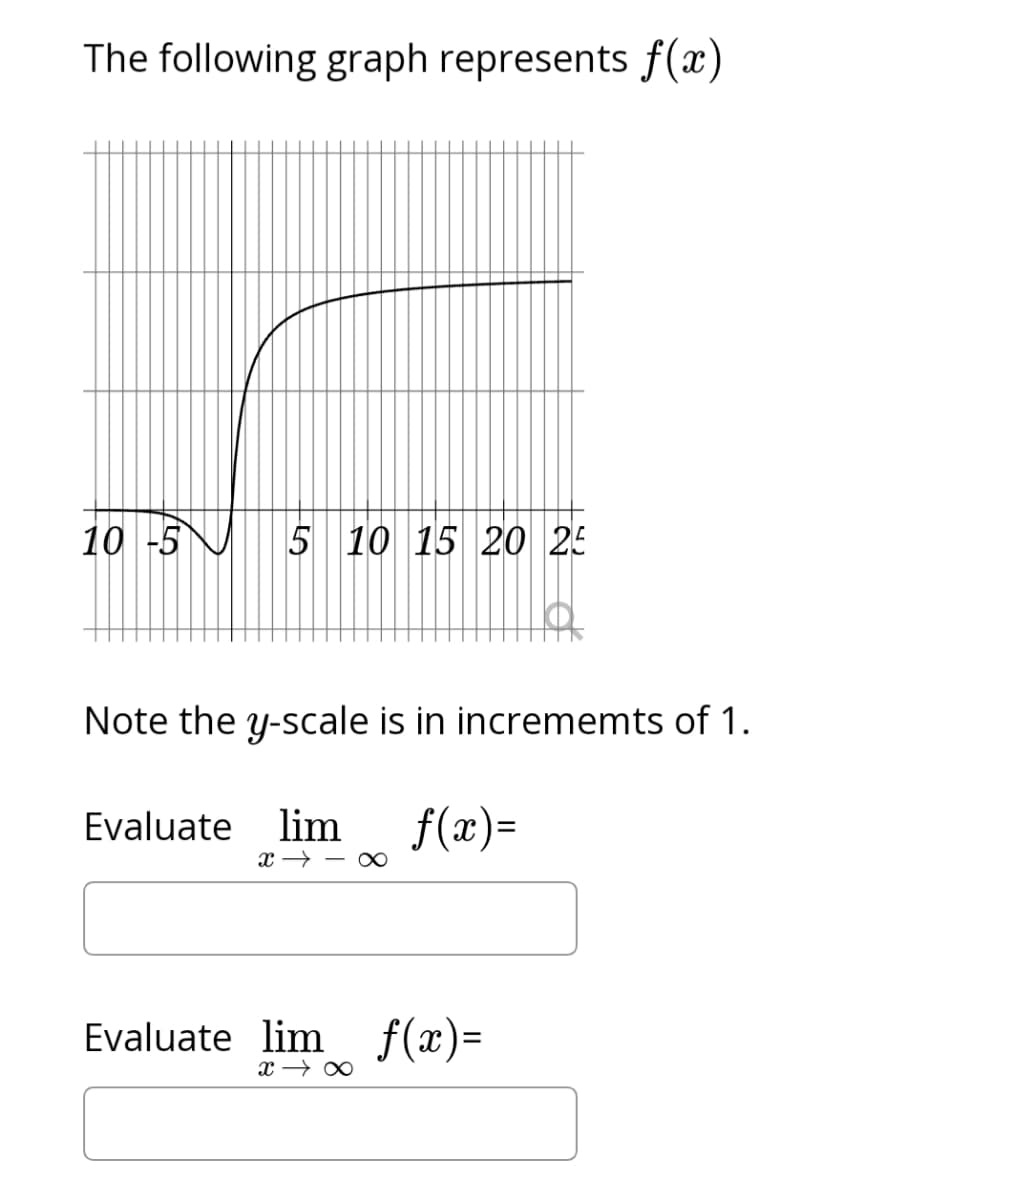 The following graph represents f(x)
10 -5
5 10 15 20 25
Note the y-scale is in incrememts of 1.
Evaluate lim f(x)=
xx
Evaluate lim f(x)=
X18